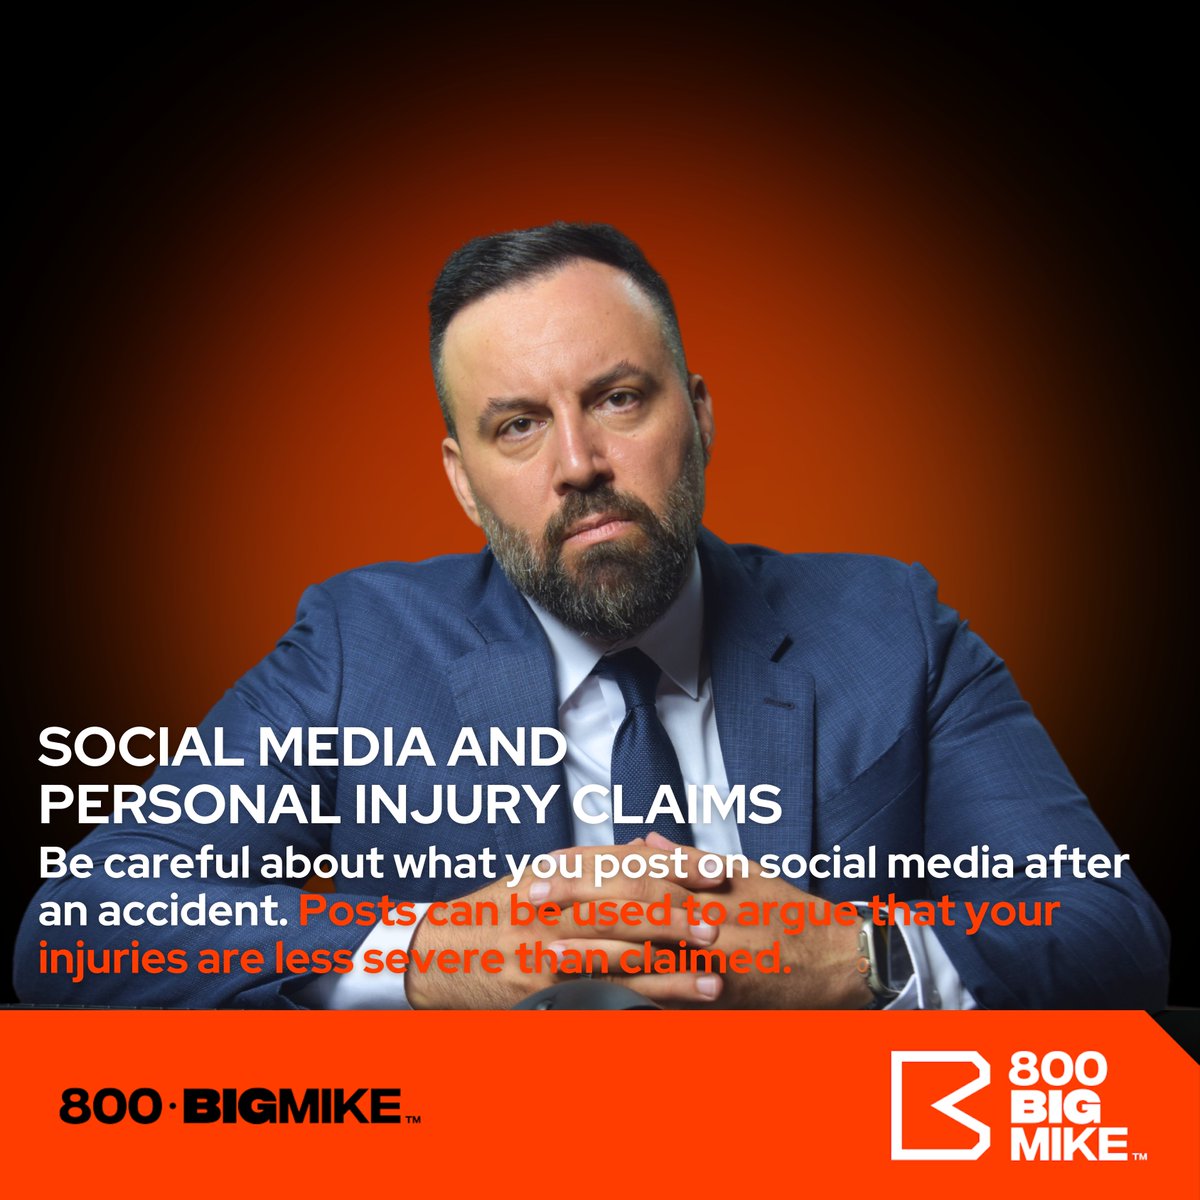 BIG MIKE
'Social Media Personal Injury Claims'
Personal Injury Facts. 💡
.
.
.
.
.
#mikejaafar #bigmike #800bigmike #personalinjury #personalinjurylawyer
#injuryattorney
#accidentlawyer
#legalhelp
#injured
#compensation
#justice
#personalinjuryclaim
#lawyerlife
#injuryadvocate